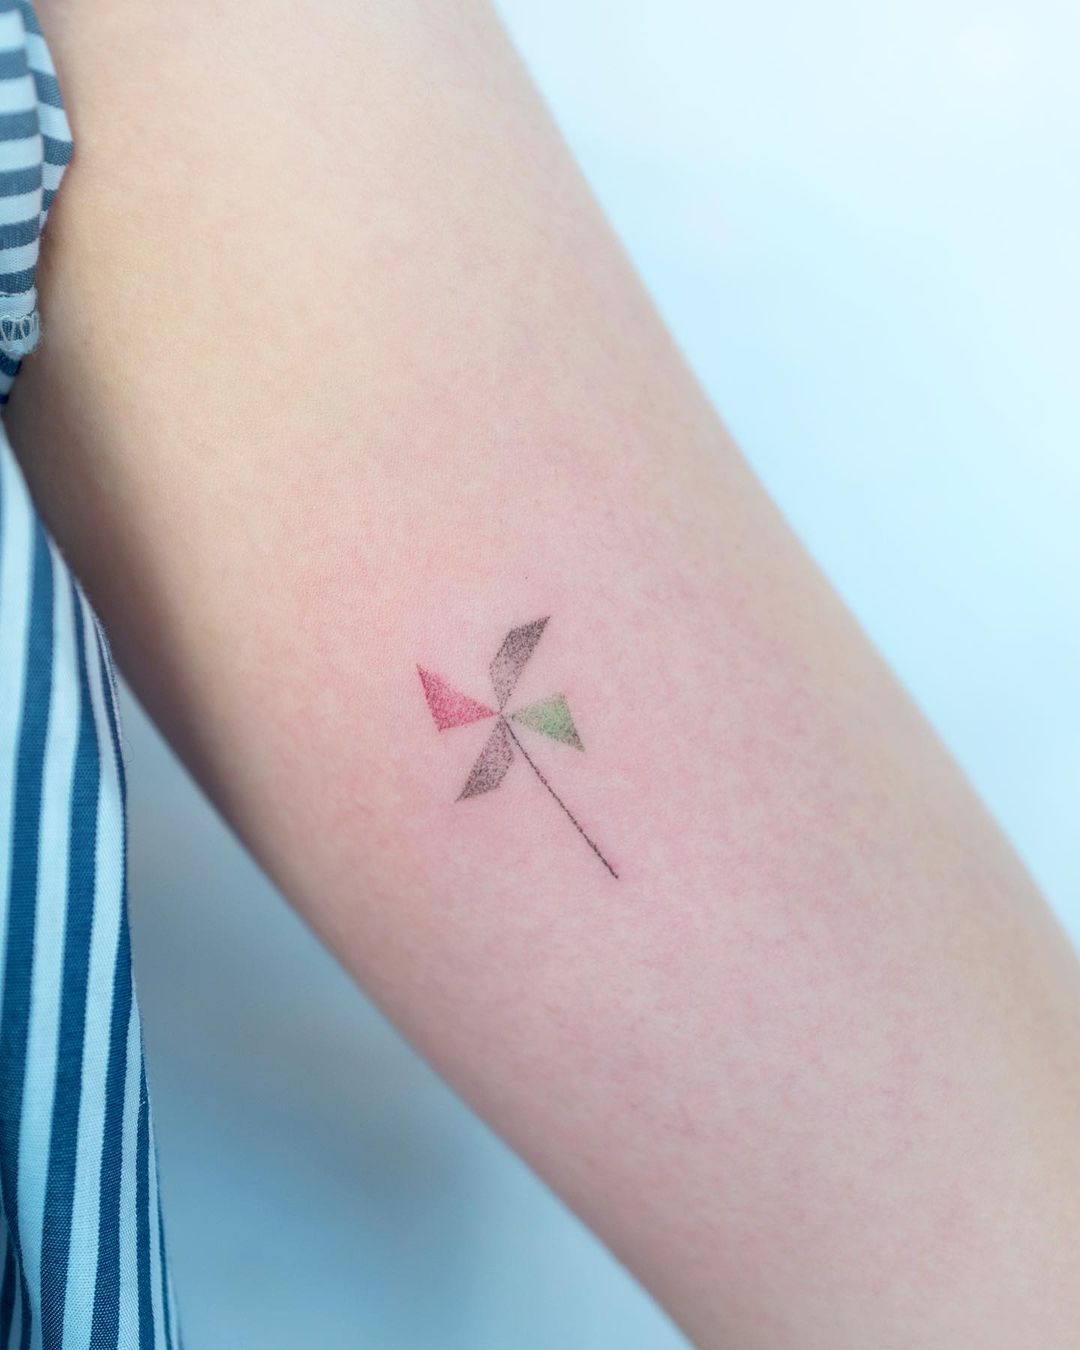 Pinwheel tattoo meaning and symbolism 